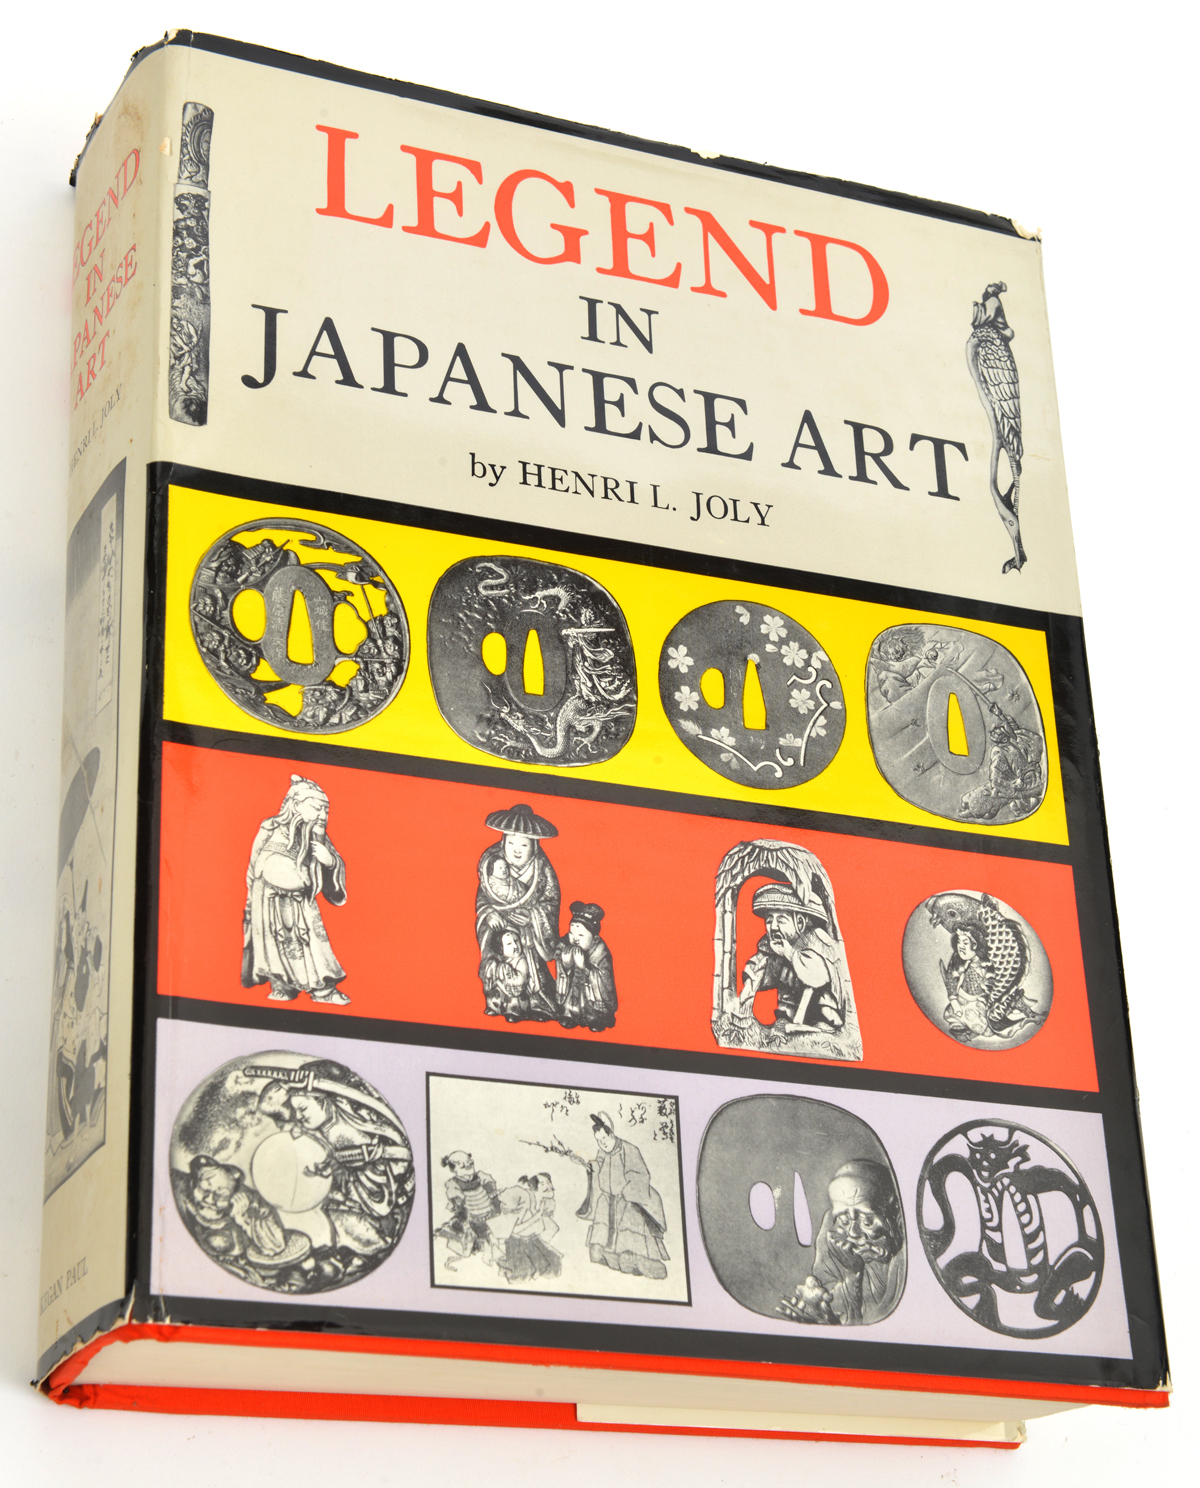 “Legend in Japanese Art” by Henri L Joly, a description of folklore etc with over 700